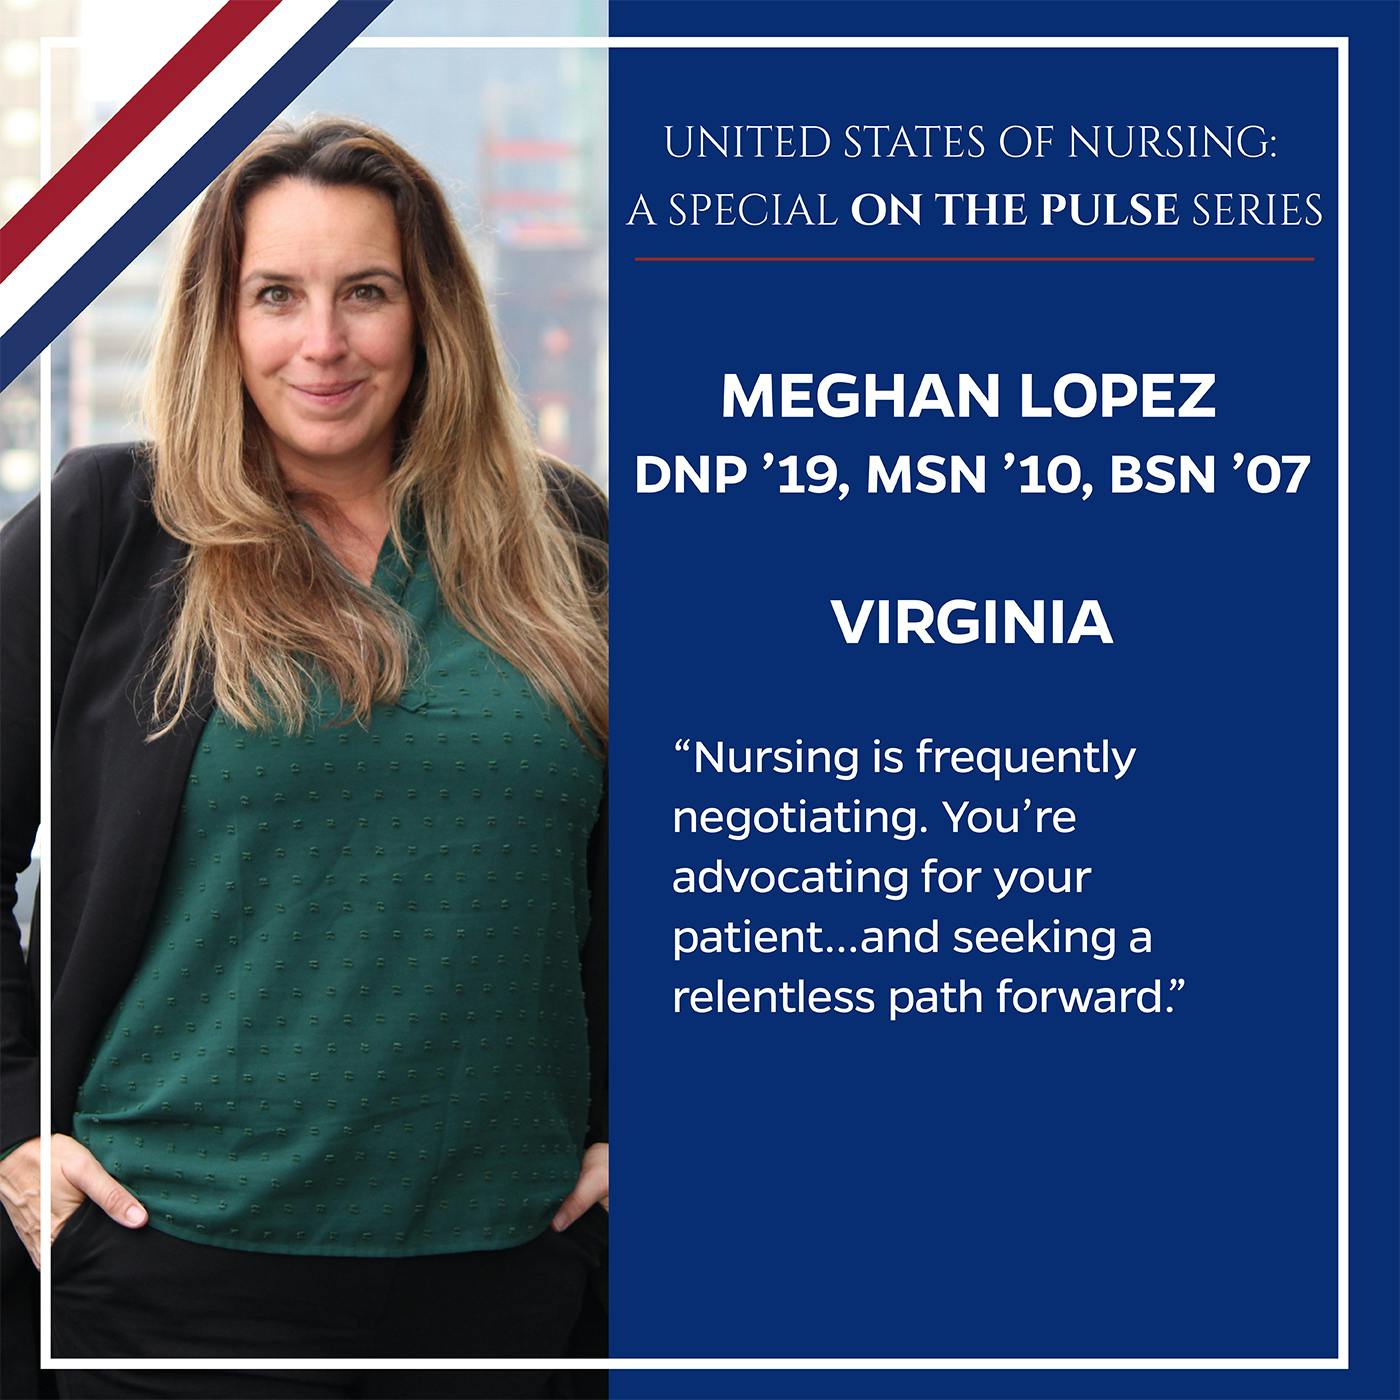 The United States of Nursing: A Limited-Edition Series of On the Pulse, Episode 4